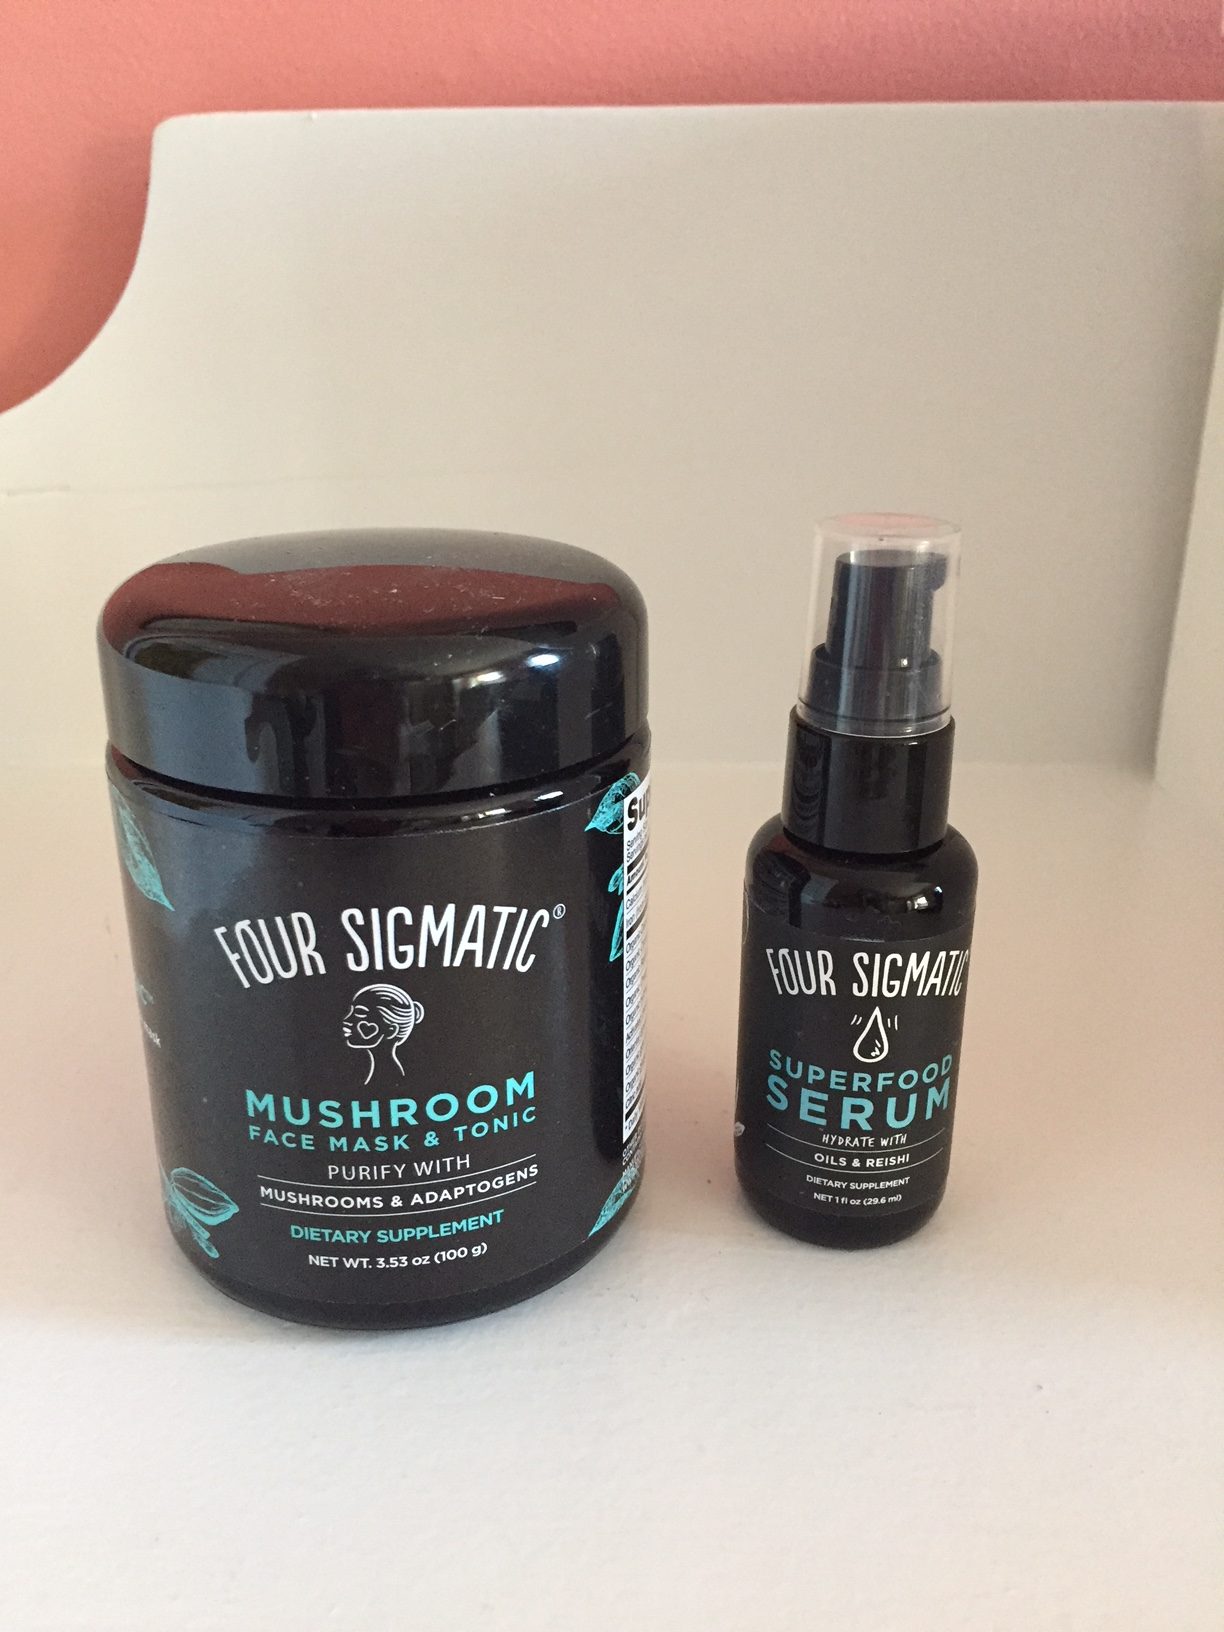 Review, Ingredients, Photos, Skincare Trend, 2019, 2020: Four Sigmatic, Mushroom Face Mask & Tonic, Superfood Serum